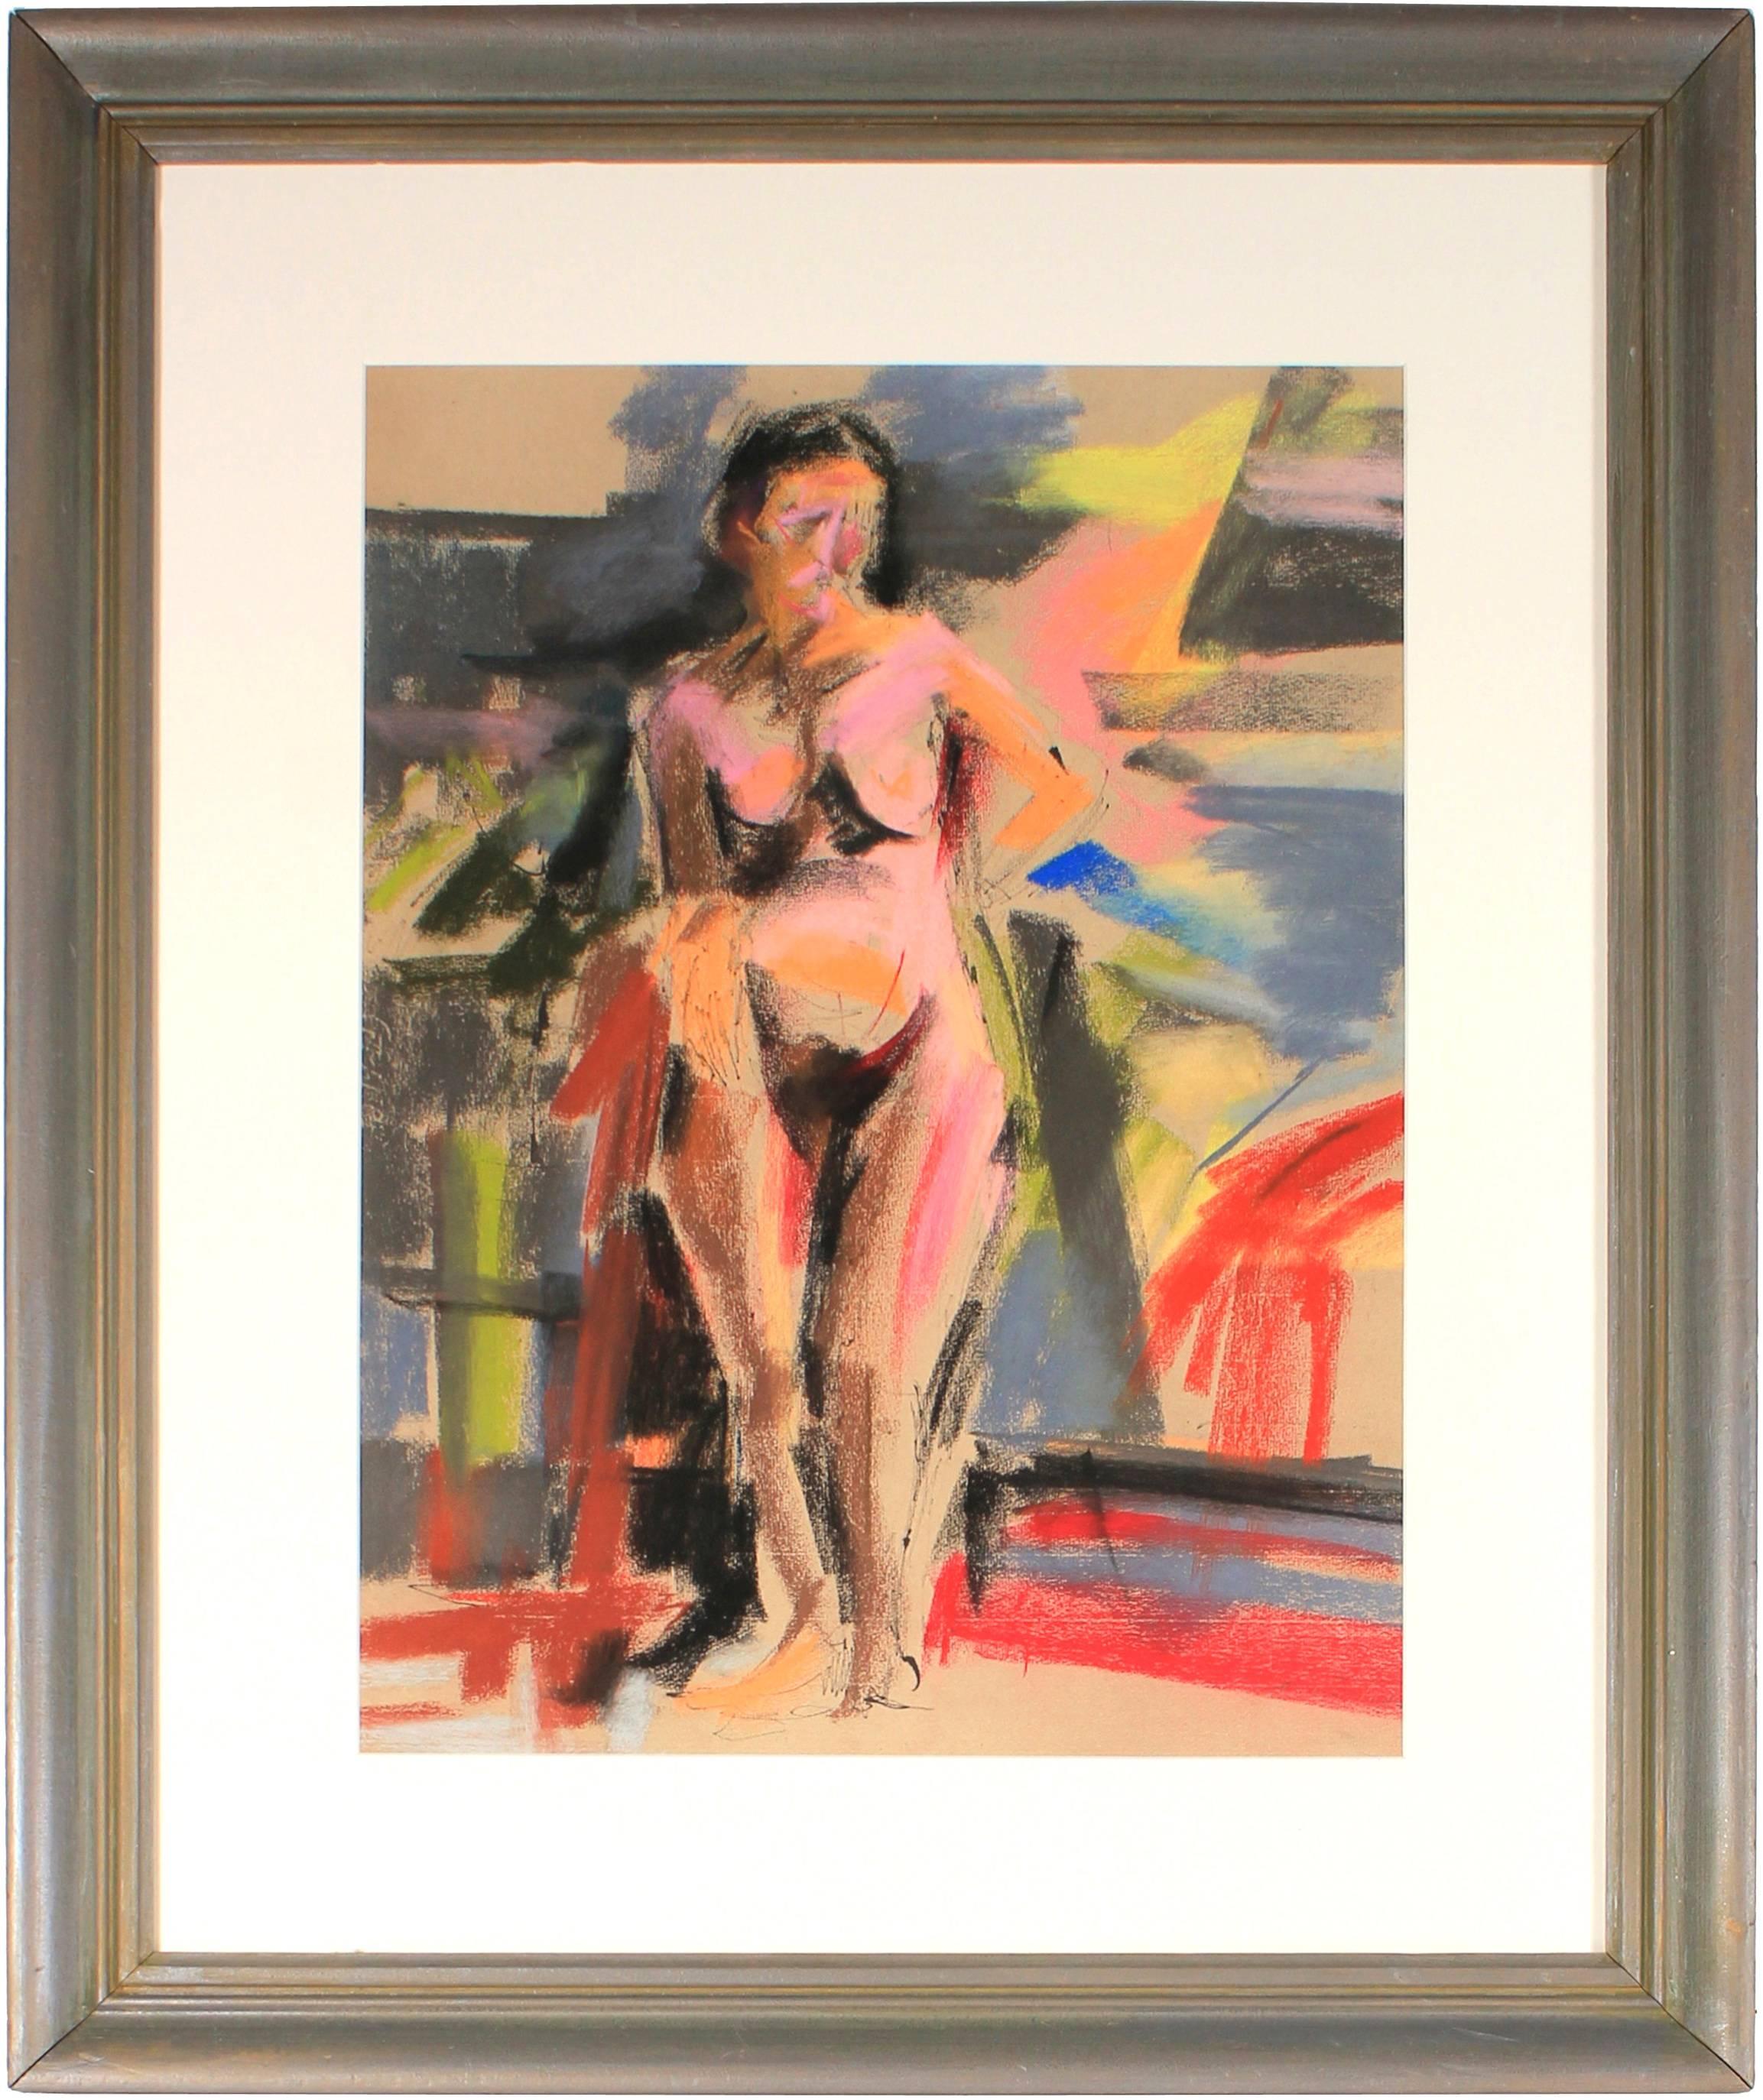 Colorful Bright Female Nude Figure in Pastel, 20th Century - Art by Seymour Tubis